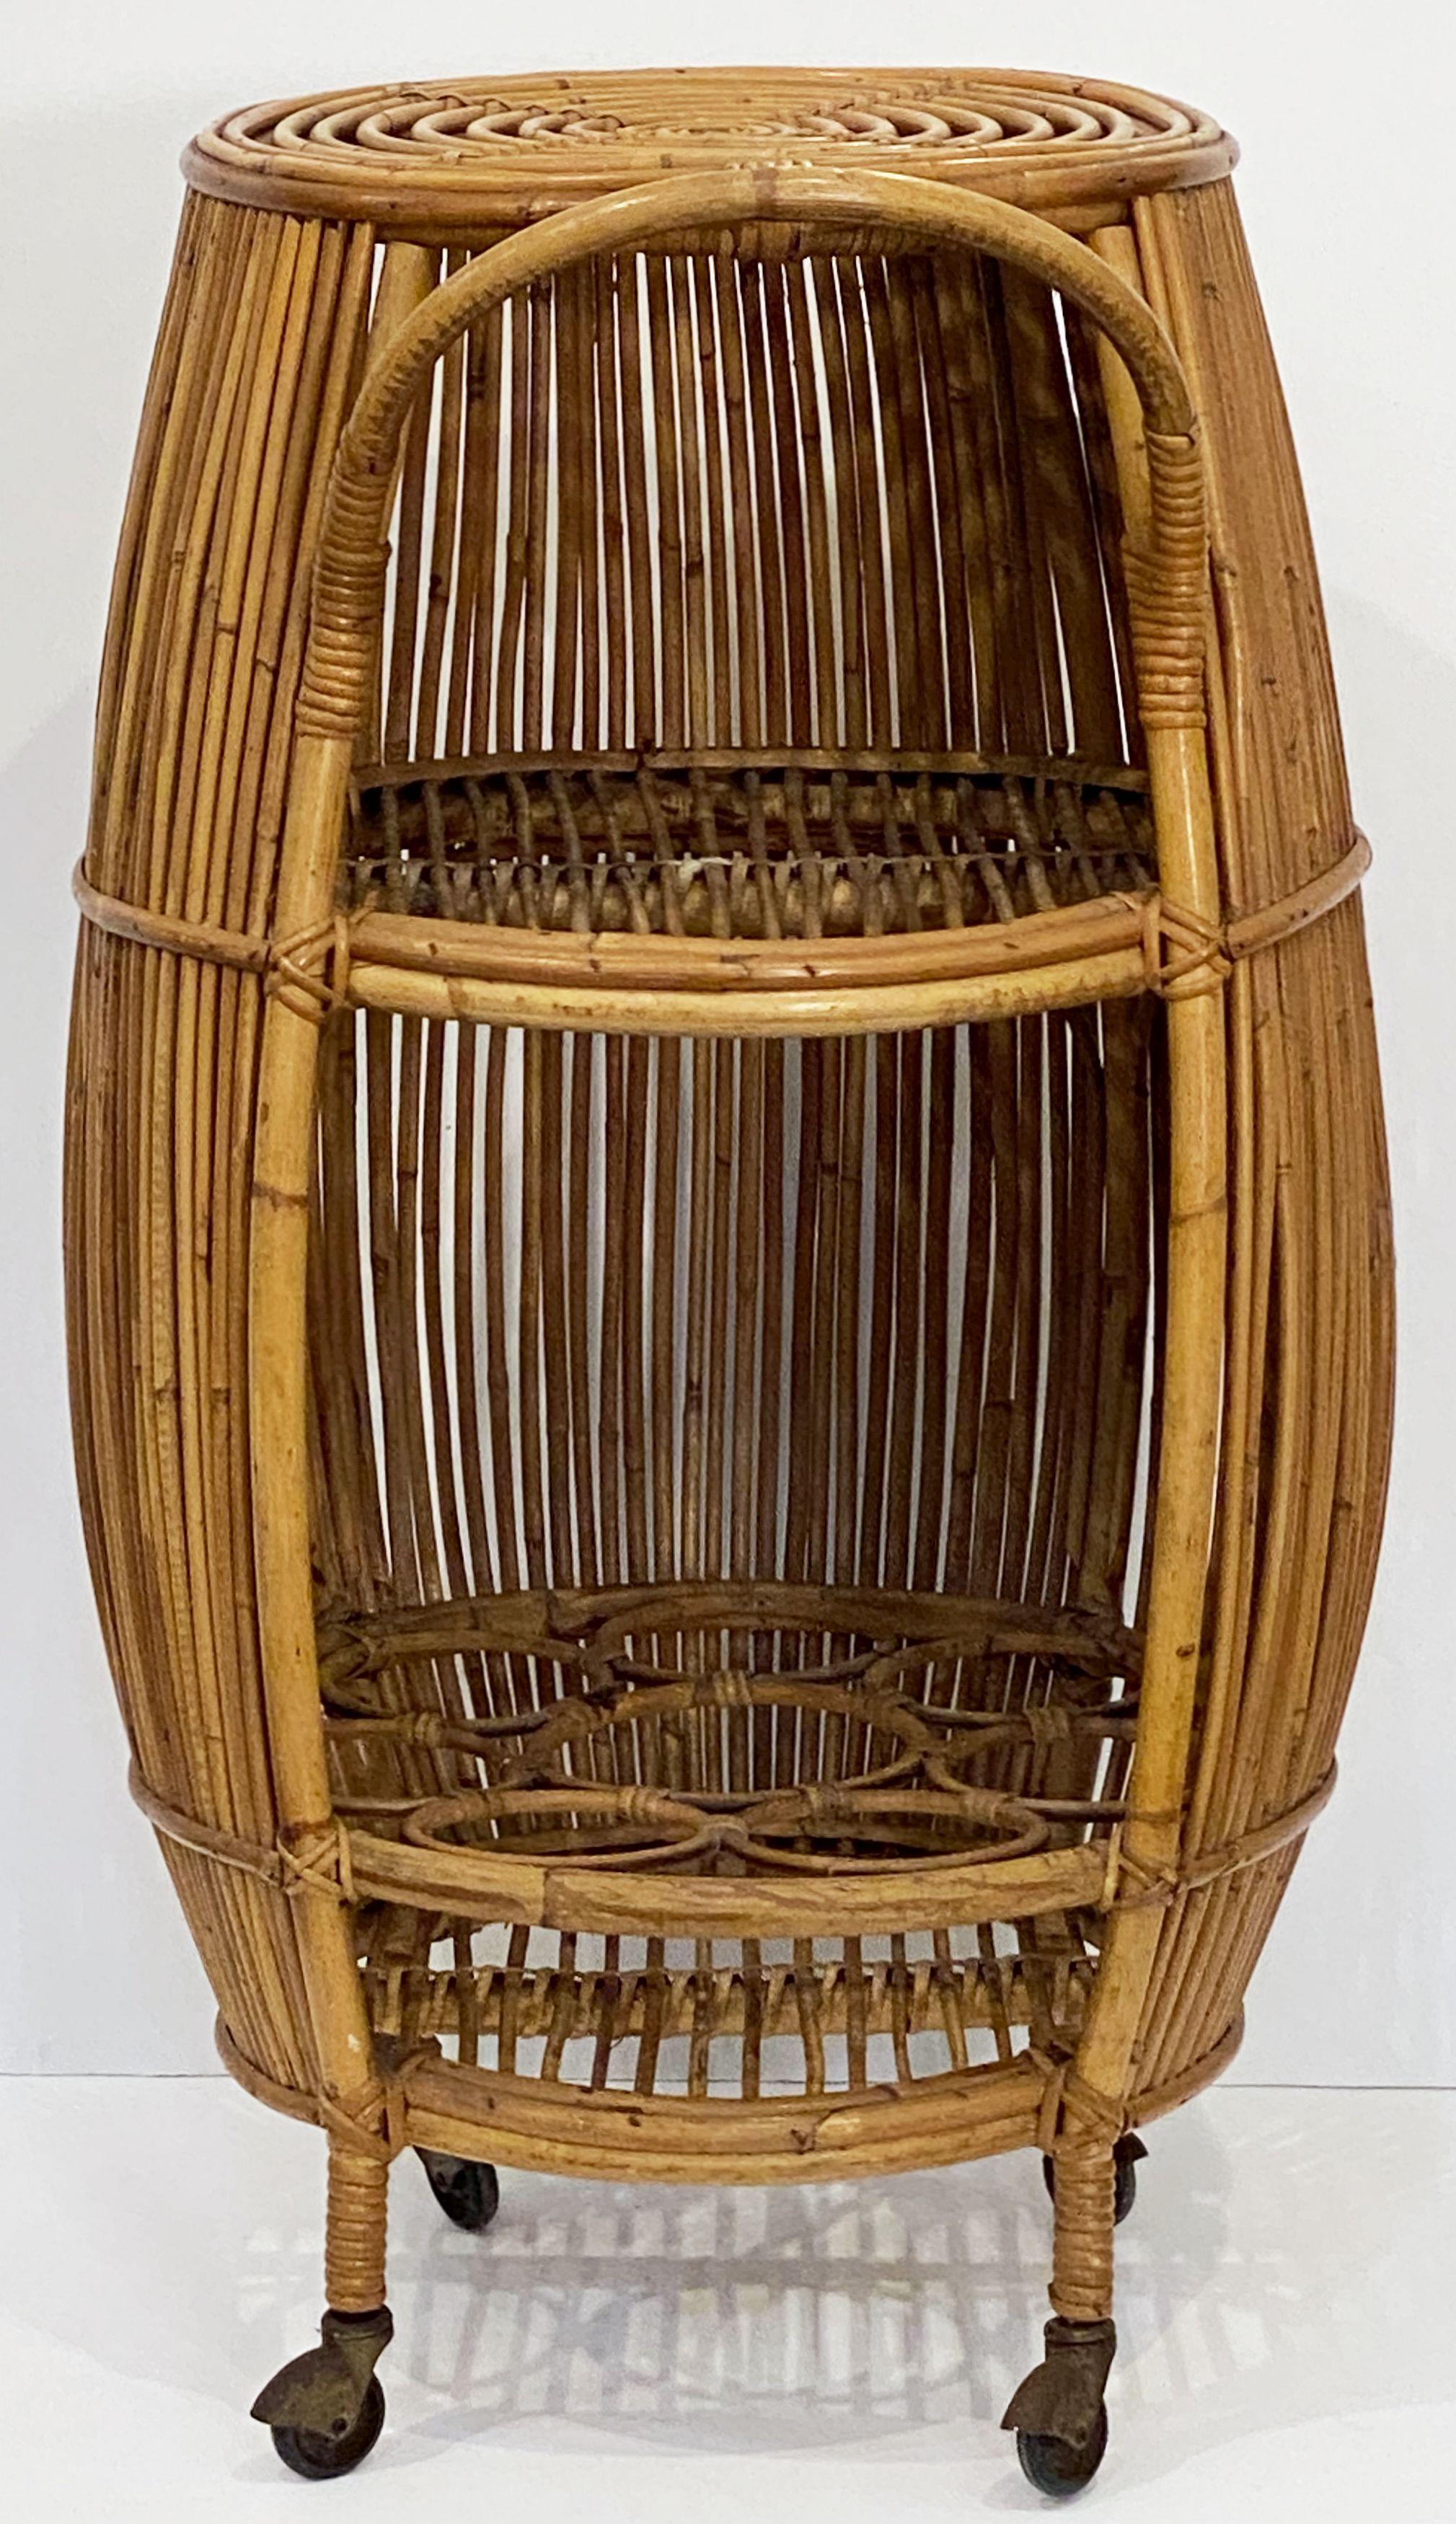 A fine Italian bar cart or trolley in rattan and bamboo from the 1960s, featuring a barrel-shaped design with curved handle, the top with a spiral design of rattan, an interior shelf, the base with fittings for bottles, set upon for rolling wheels.